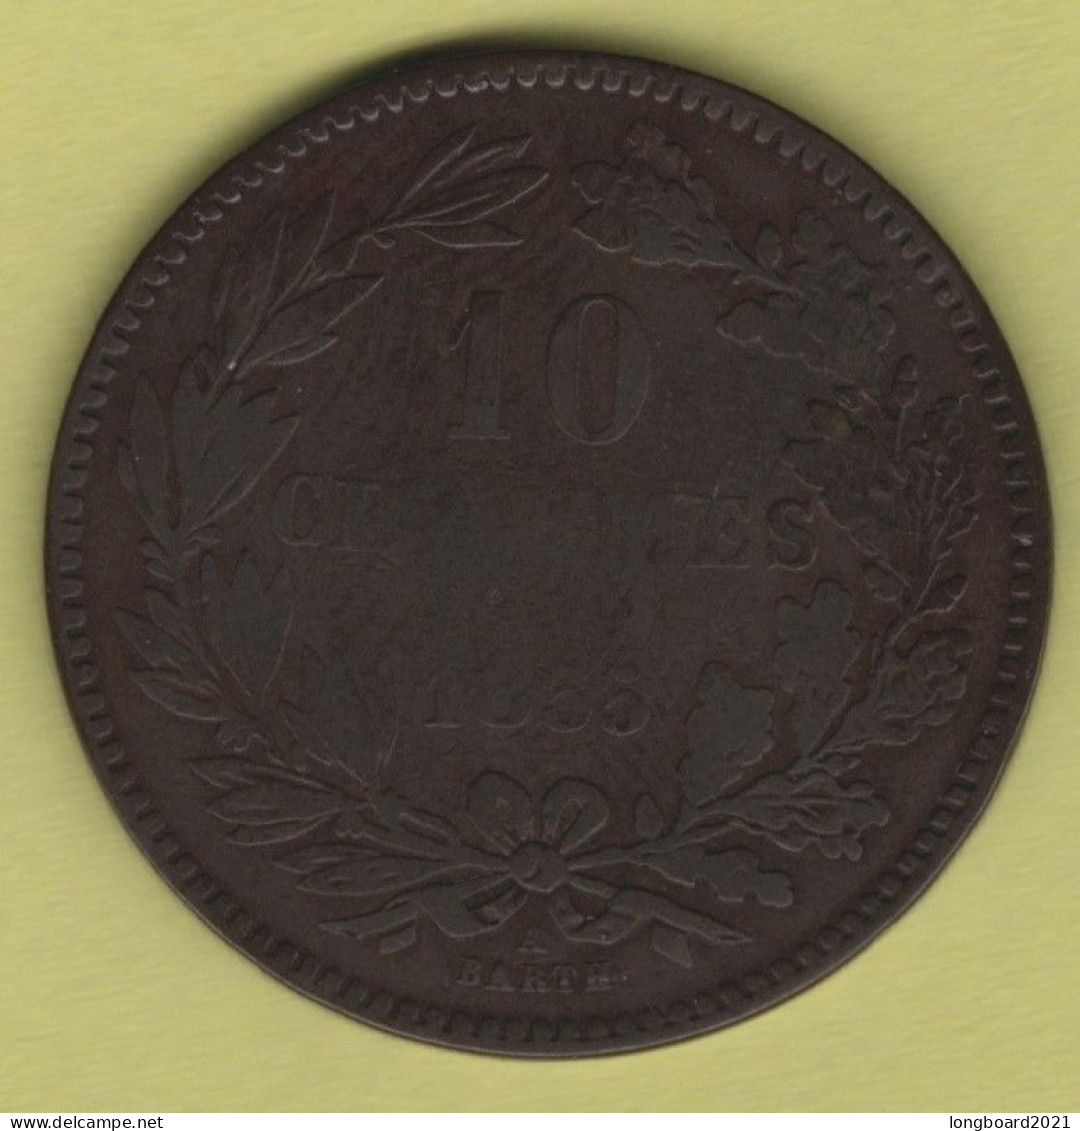 LUXEMBOURG - 10 CENTIMES 1855 - Luxemburg